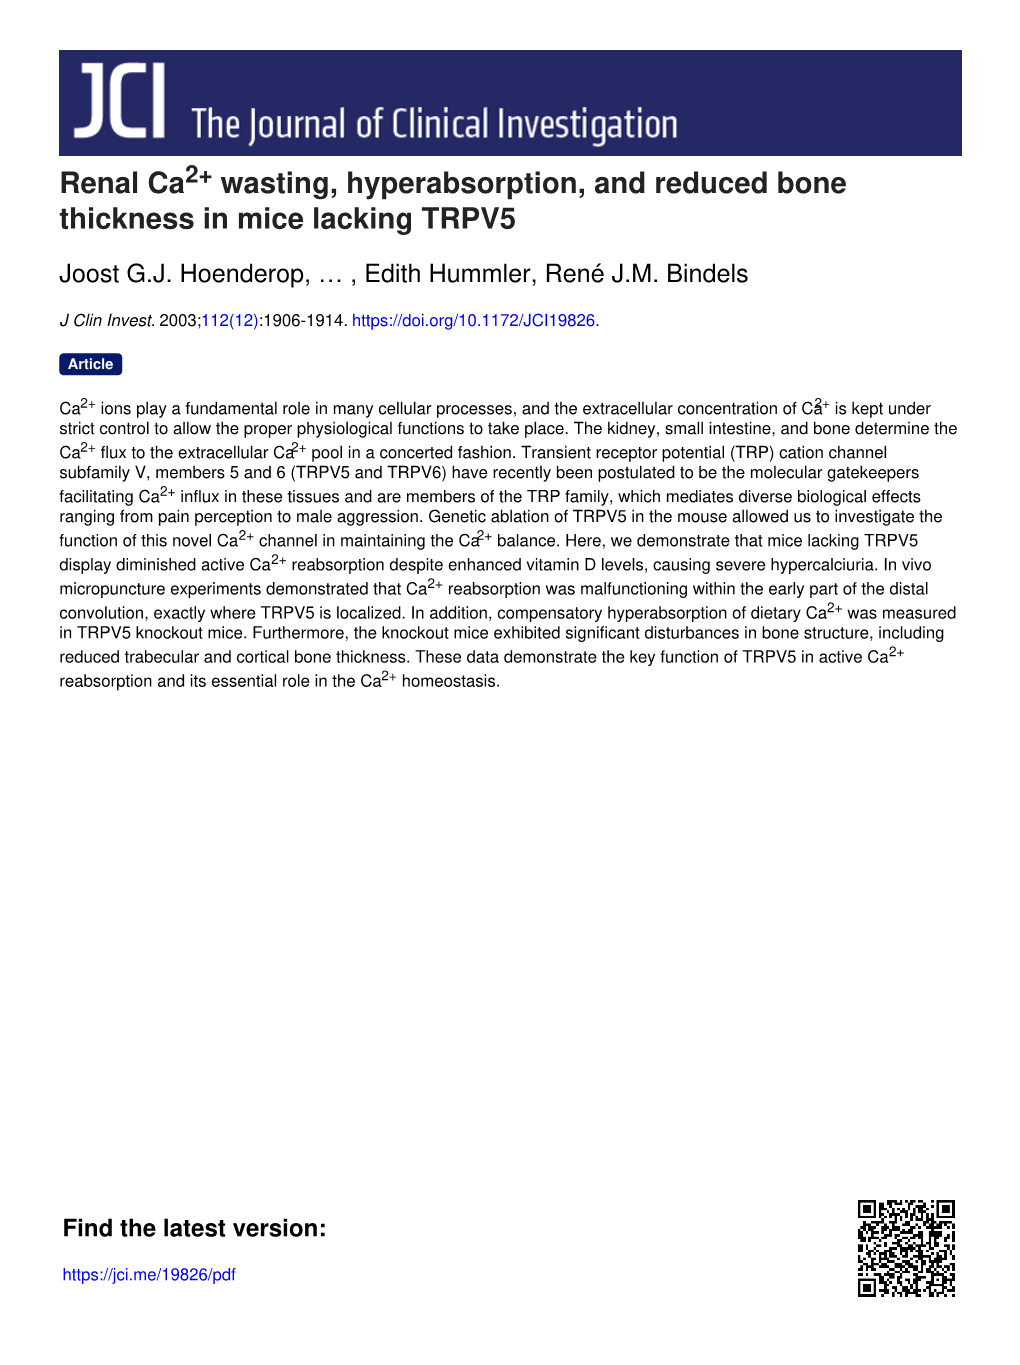 Renal Ca2+ Wasting, Hyperabsorption, and Reduced Bone Thickness in Mice Lacking TRPV5